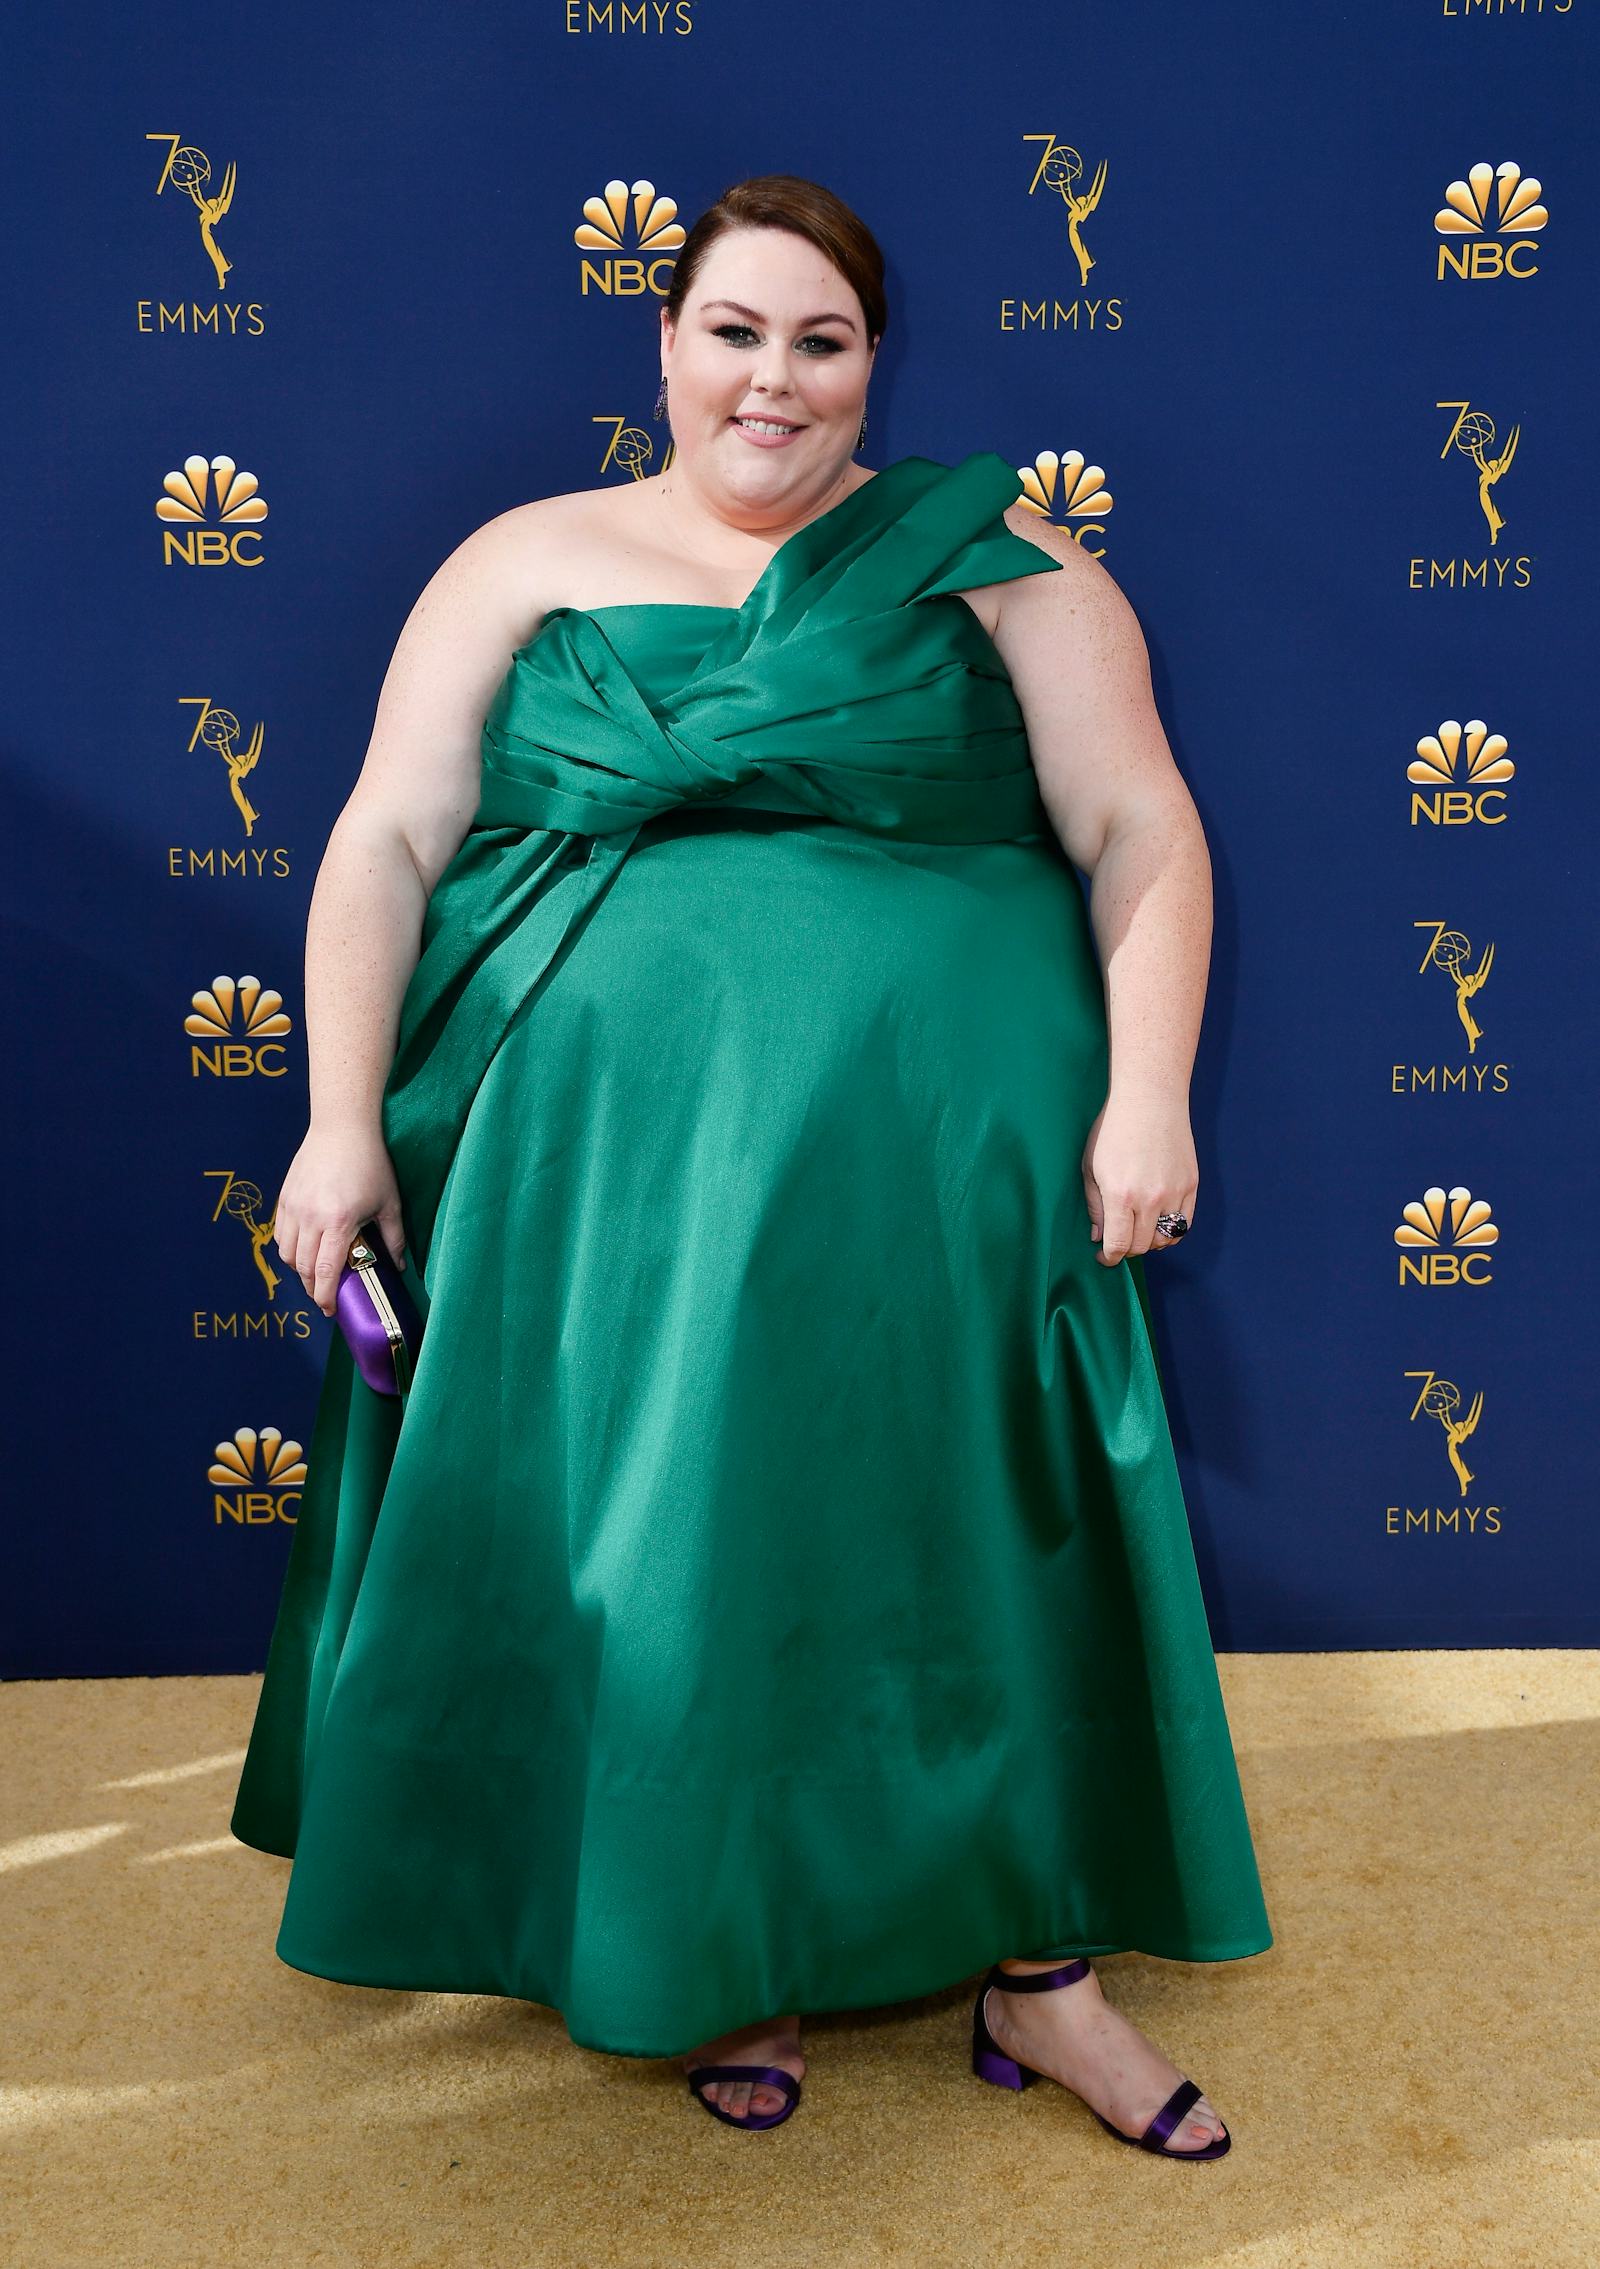 Chrissy Metz's 2018 Emmys Dress Was The Most Beautiful Emerald Green Shade